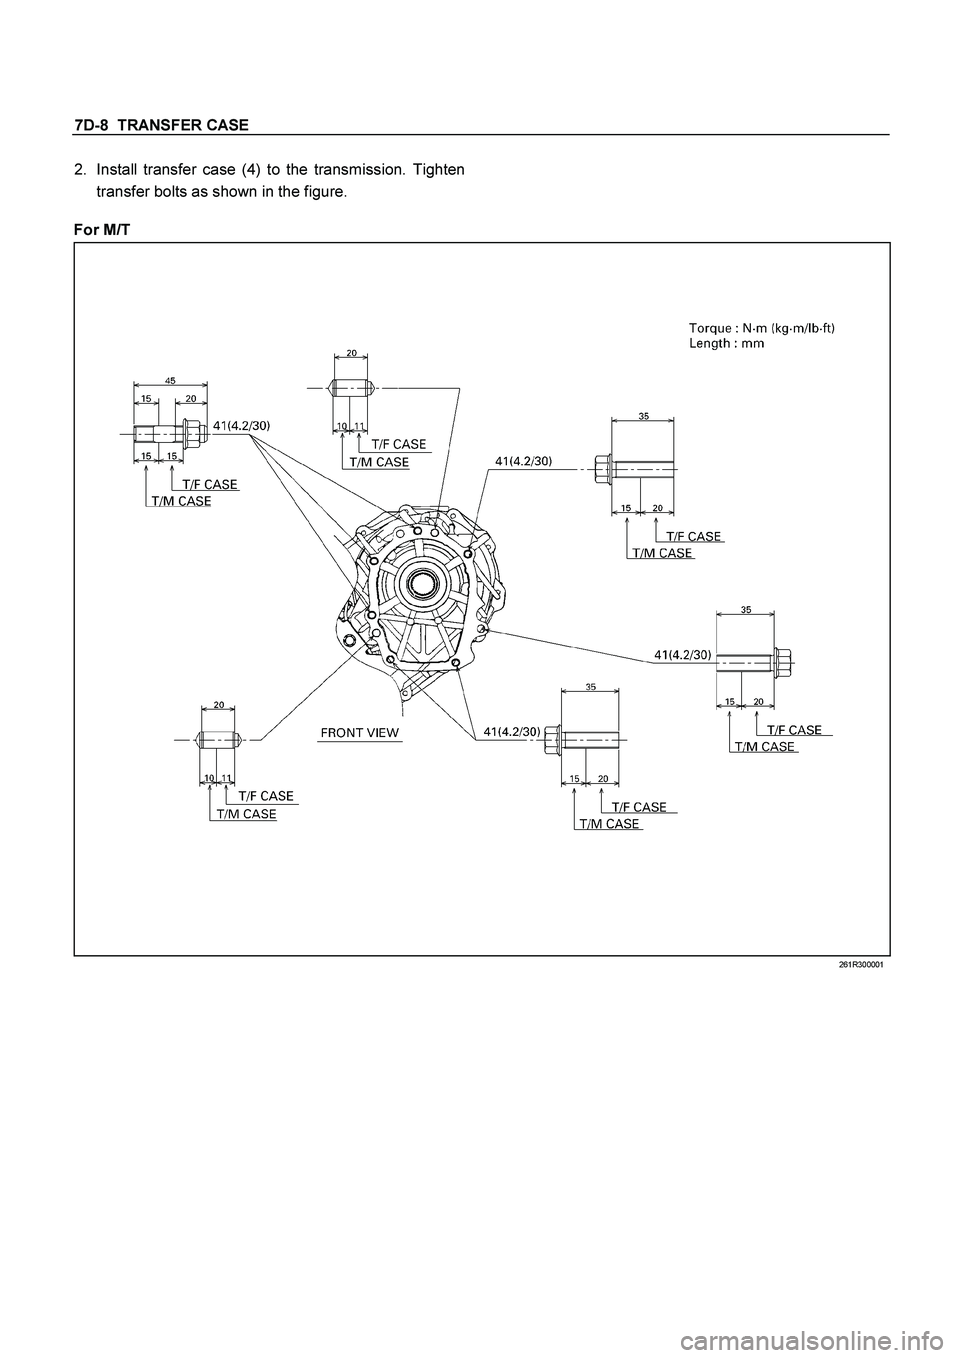 ISUZU TF SERIES 2004  Workshop Manual 7D-8  TRANSFER CASE
 
2. 
Install transfer case (4) to the transmission. Tighten
transfer bolts as shown in the figure. 
   
For M/T 
 261R300001  